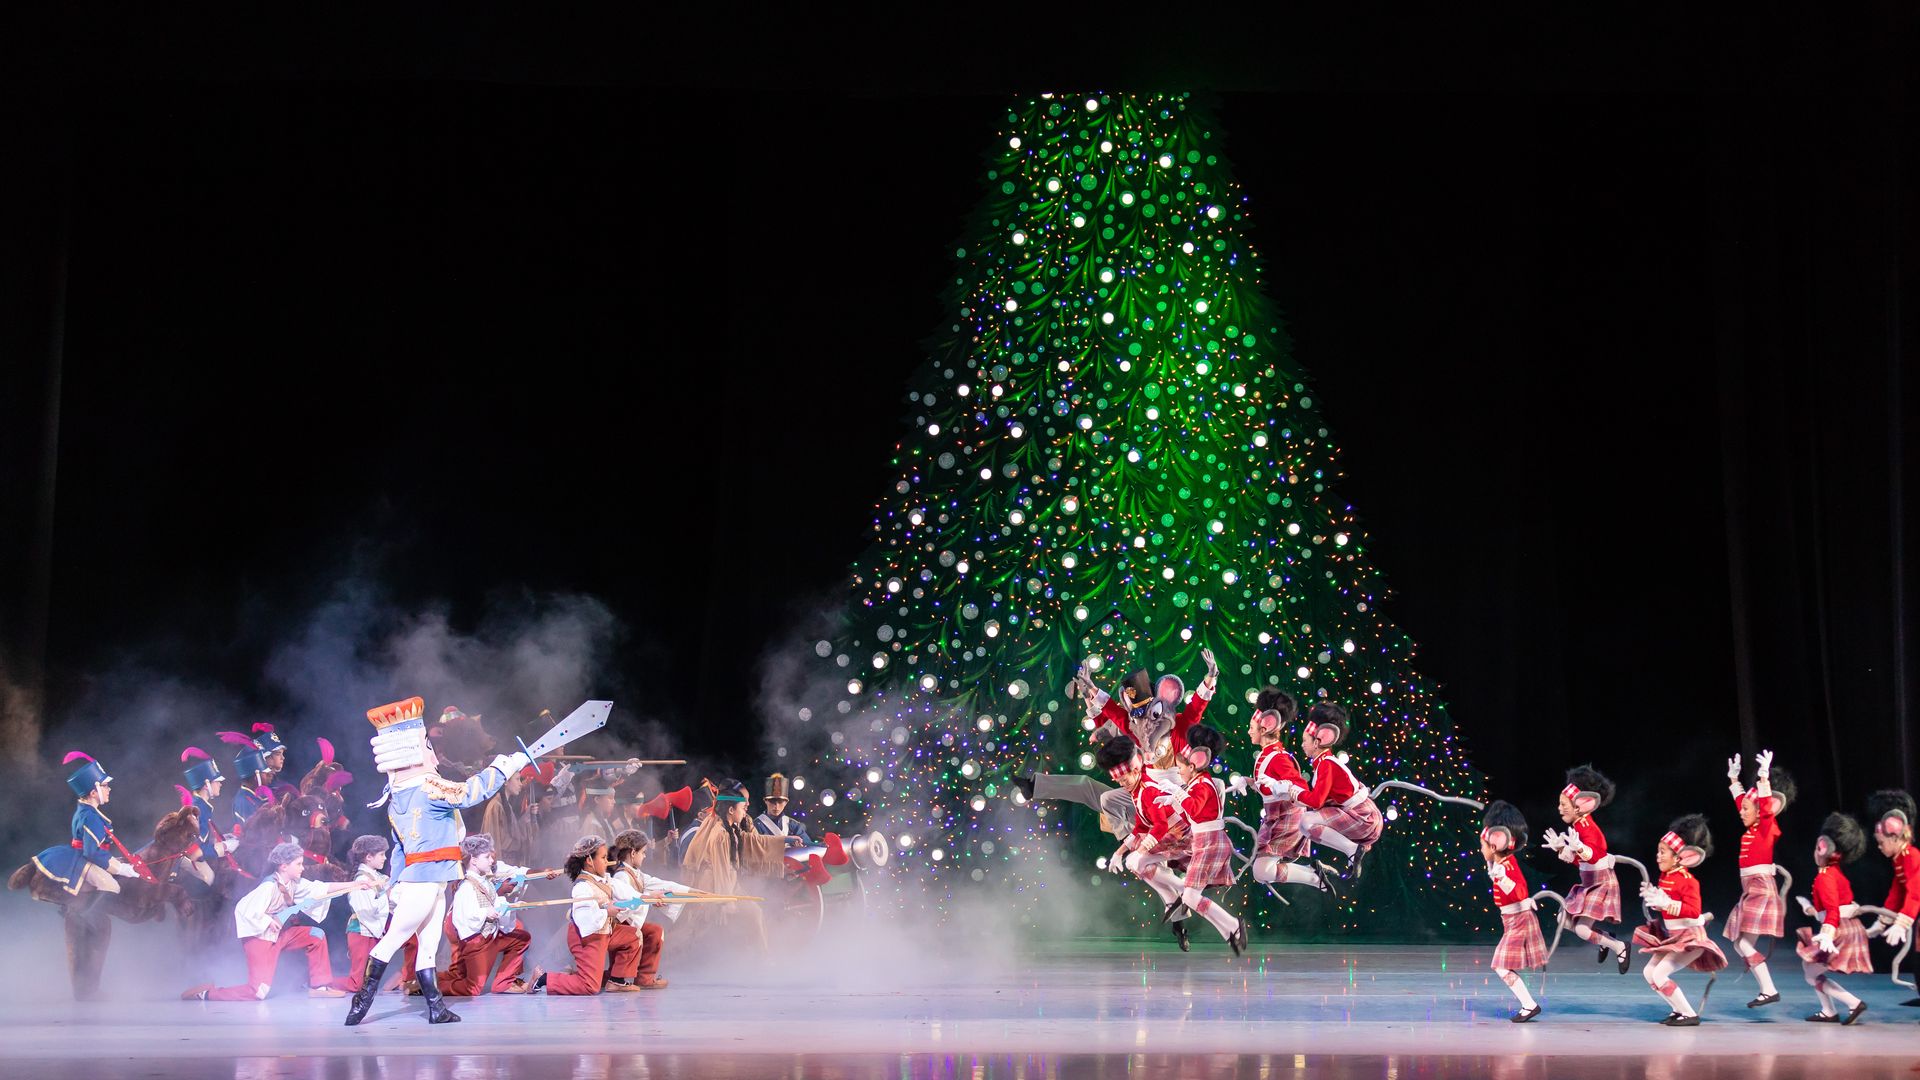 Ballet performers dressed in Nutcracker costumes gathered around a christmas tree on stage.